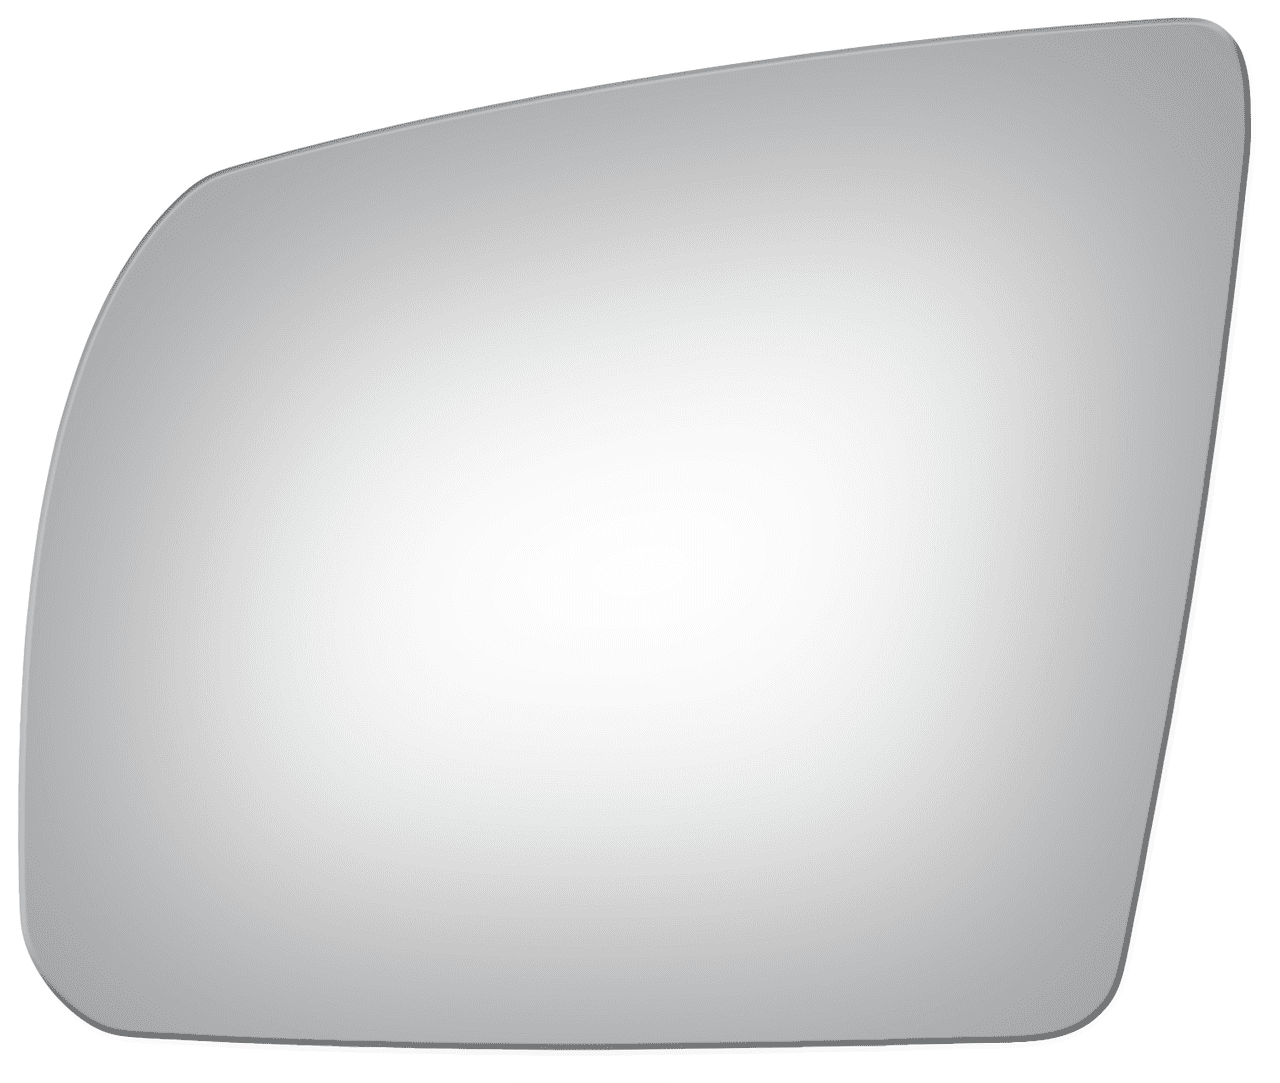 Flat Driver Side Replacement Mirror Glass for 2007-2020 Toyota Tundra - Walmart.com - Walmart.com 2007 Toyota Tundra Side Mirror Glass Replacement